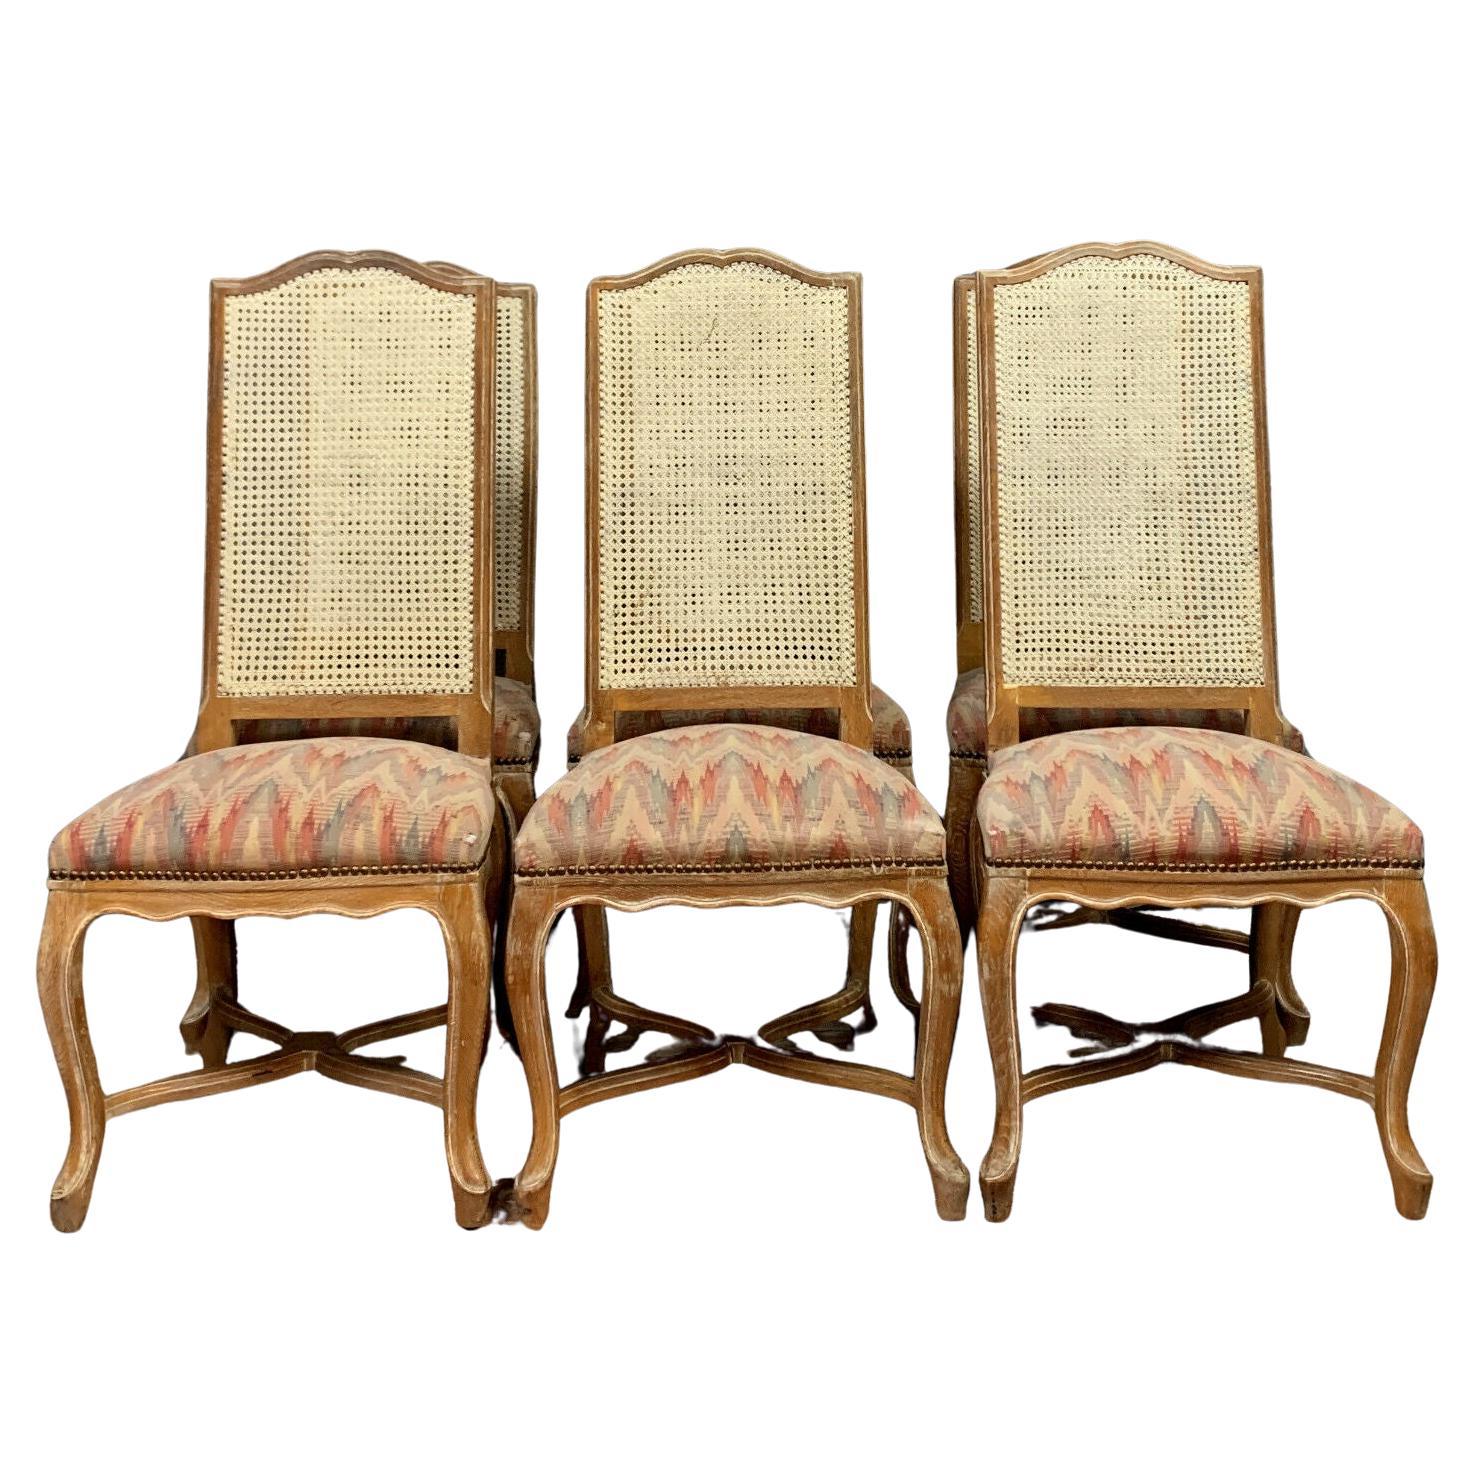 Stunning Set of 6 Louis XV High Back Cerused Wood Chairs circa 1900 -1X15 For Sale